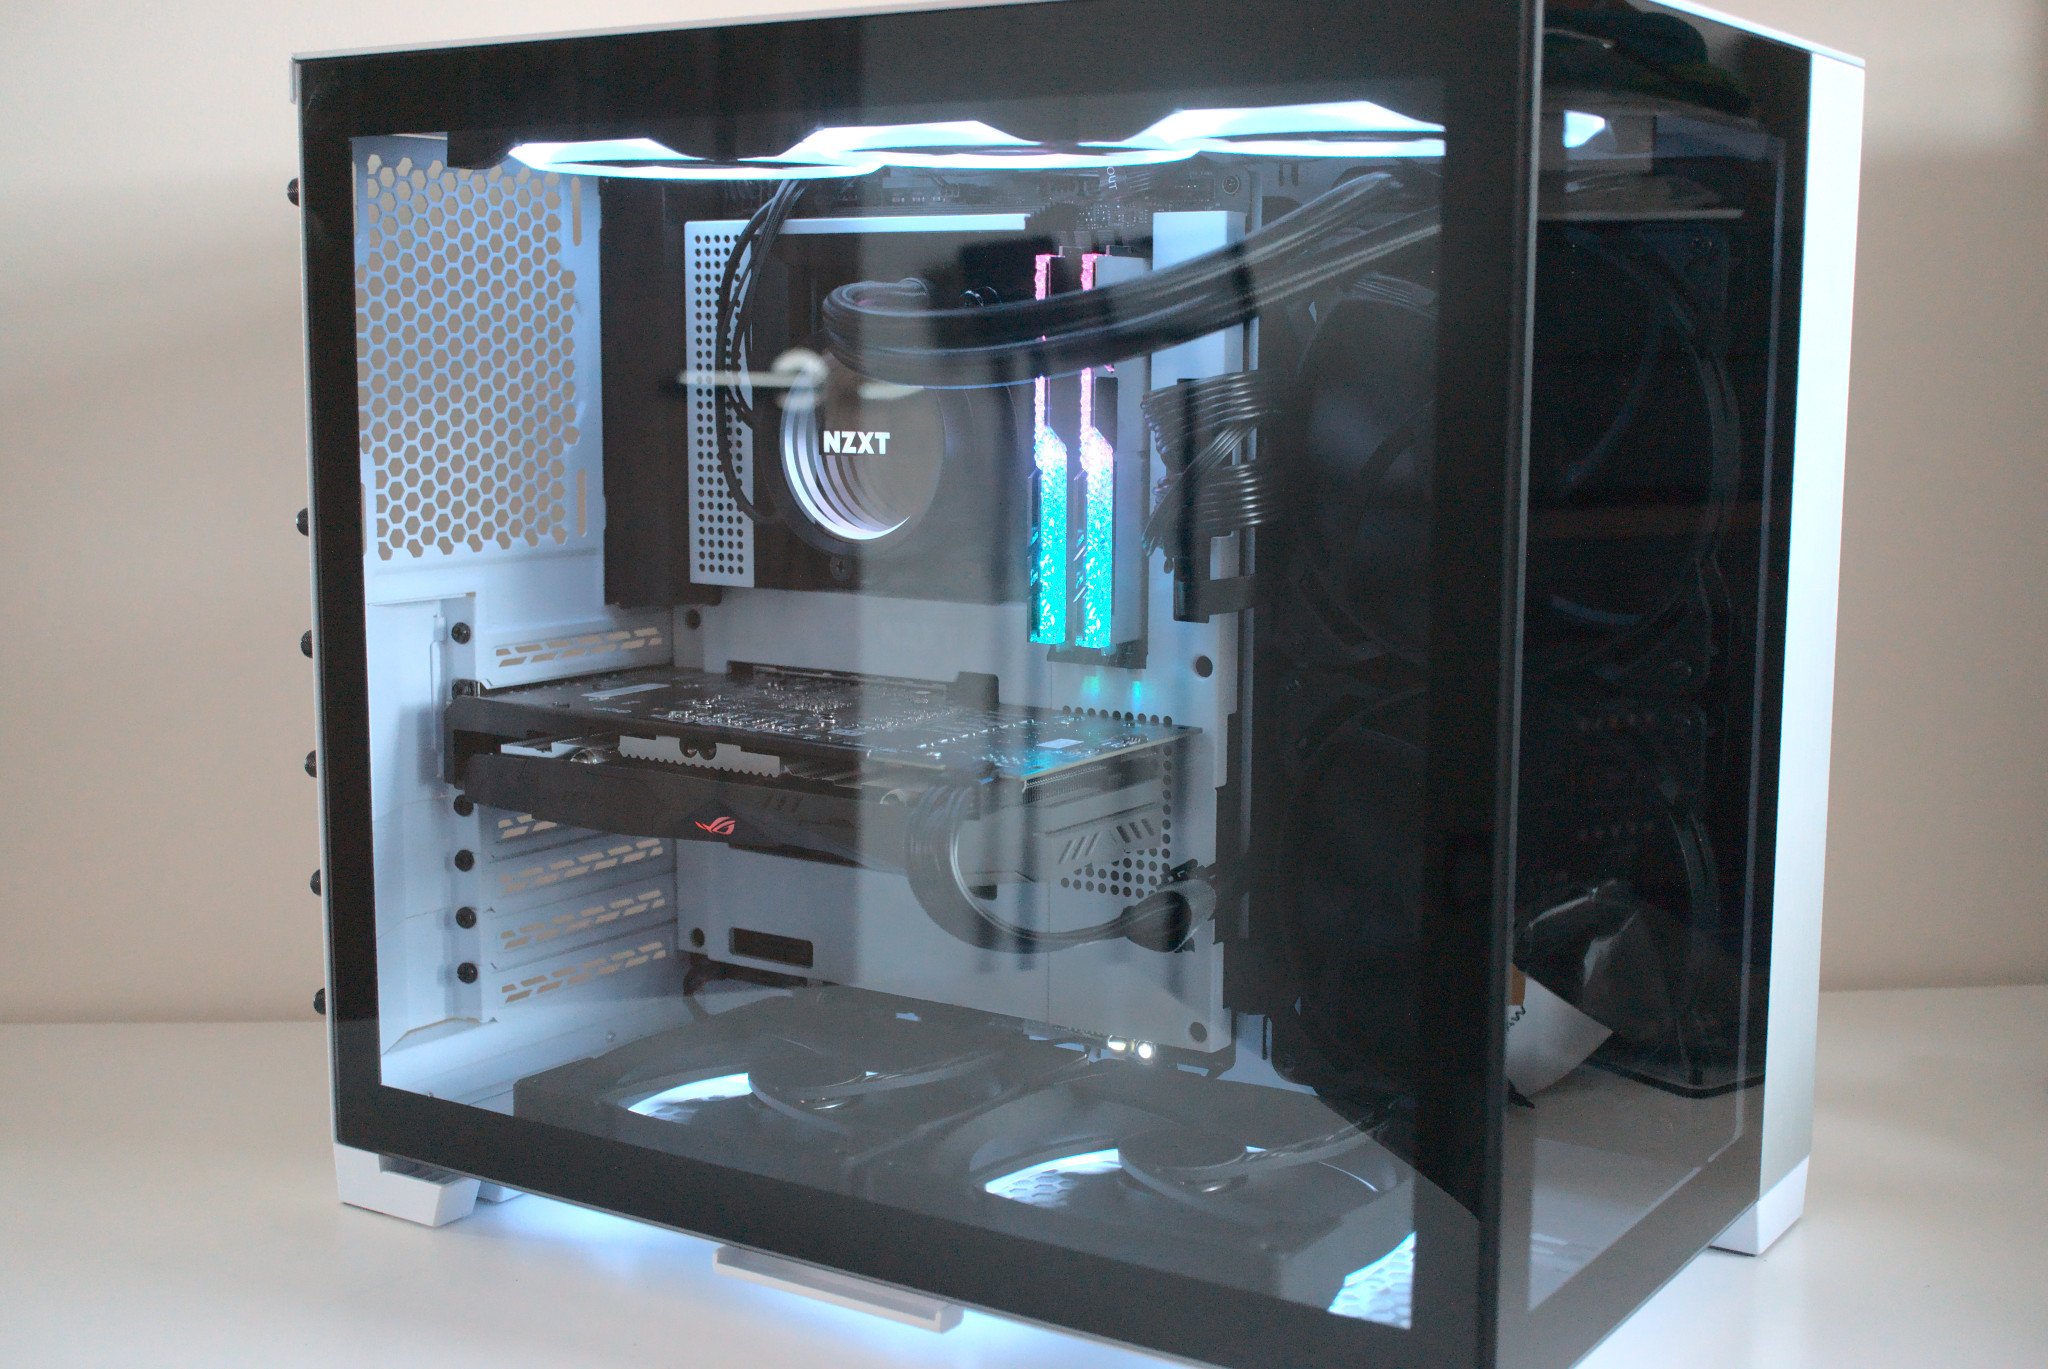 If you had $500 to upgrade your PC, which part would you pick? : r